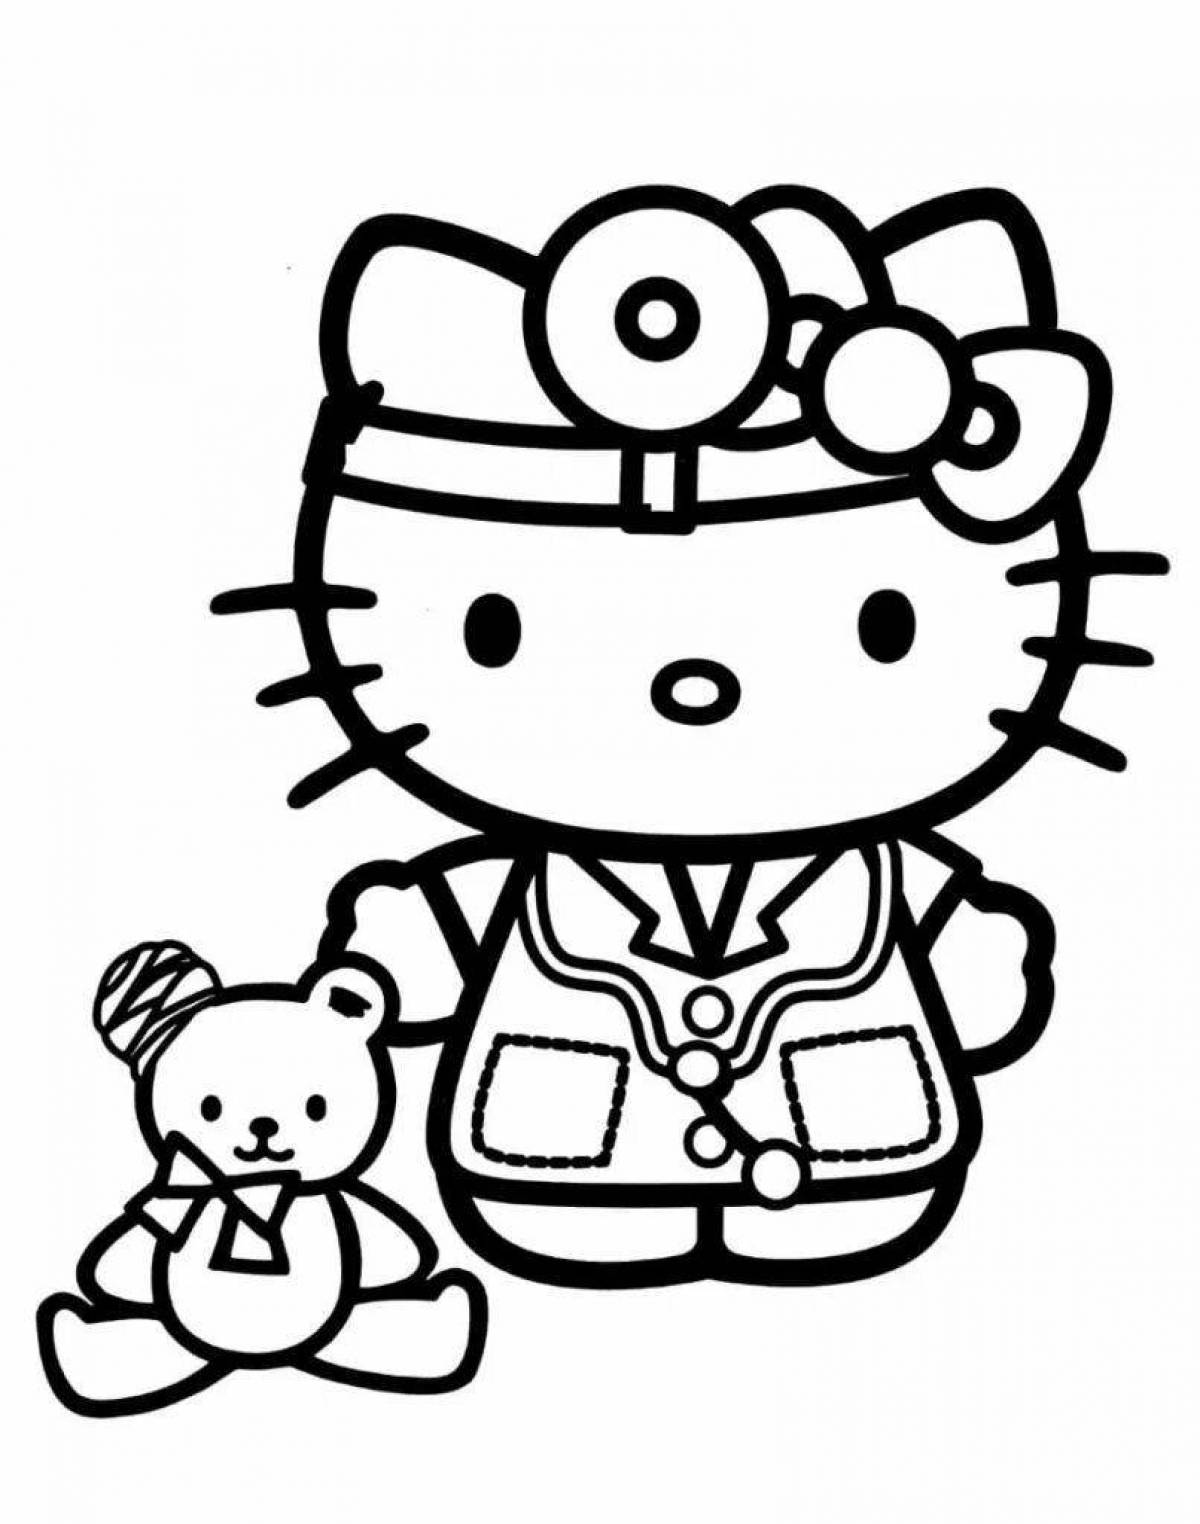 Kitty mity's merciful coloring book